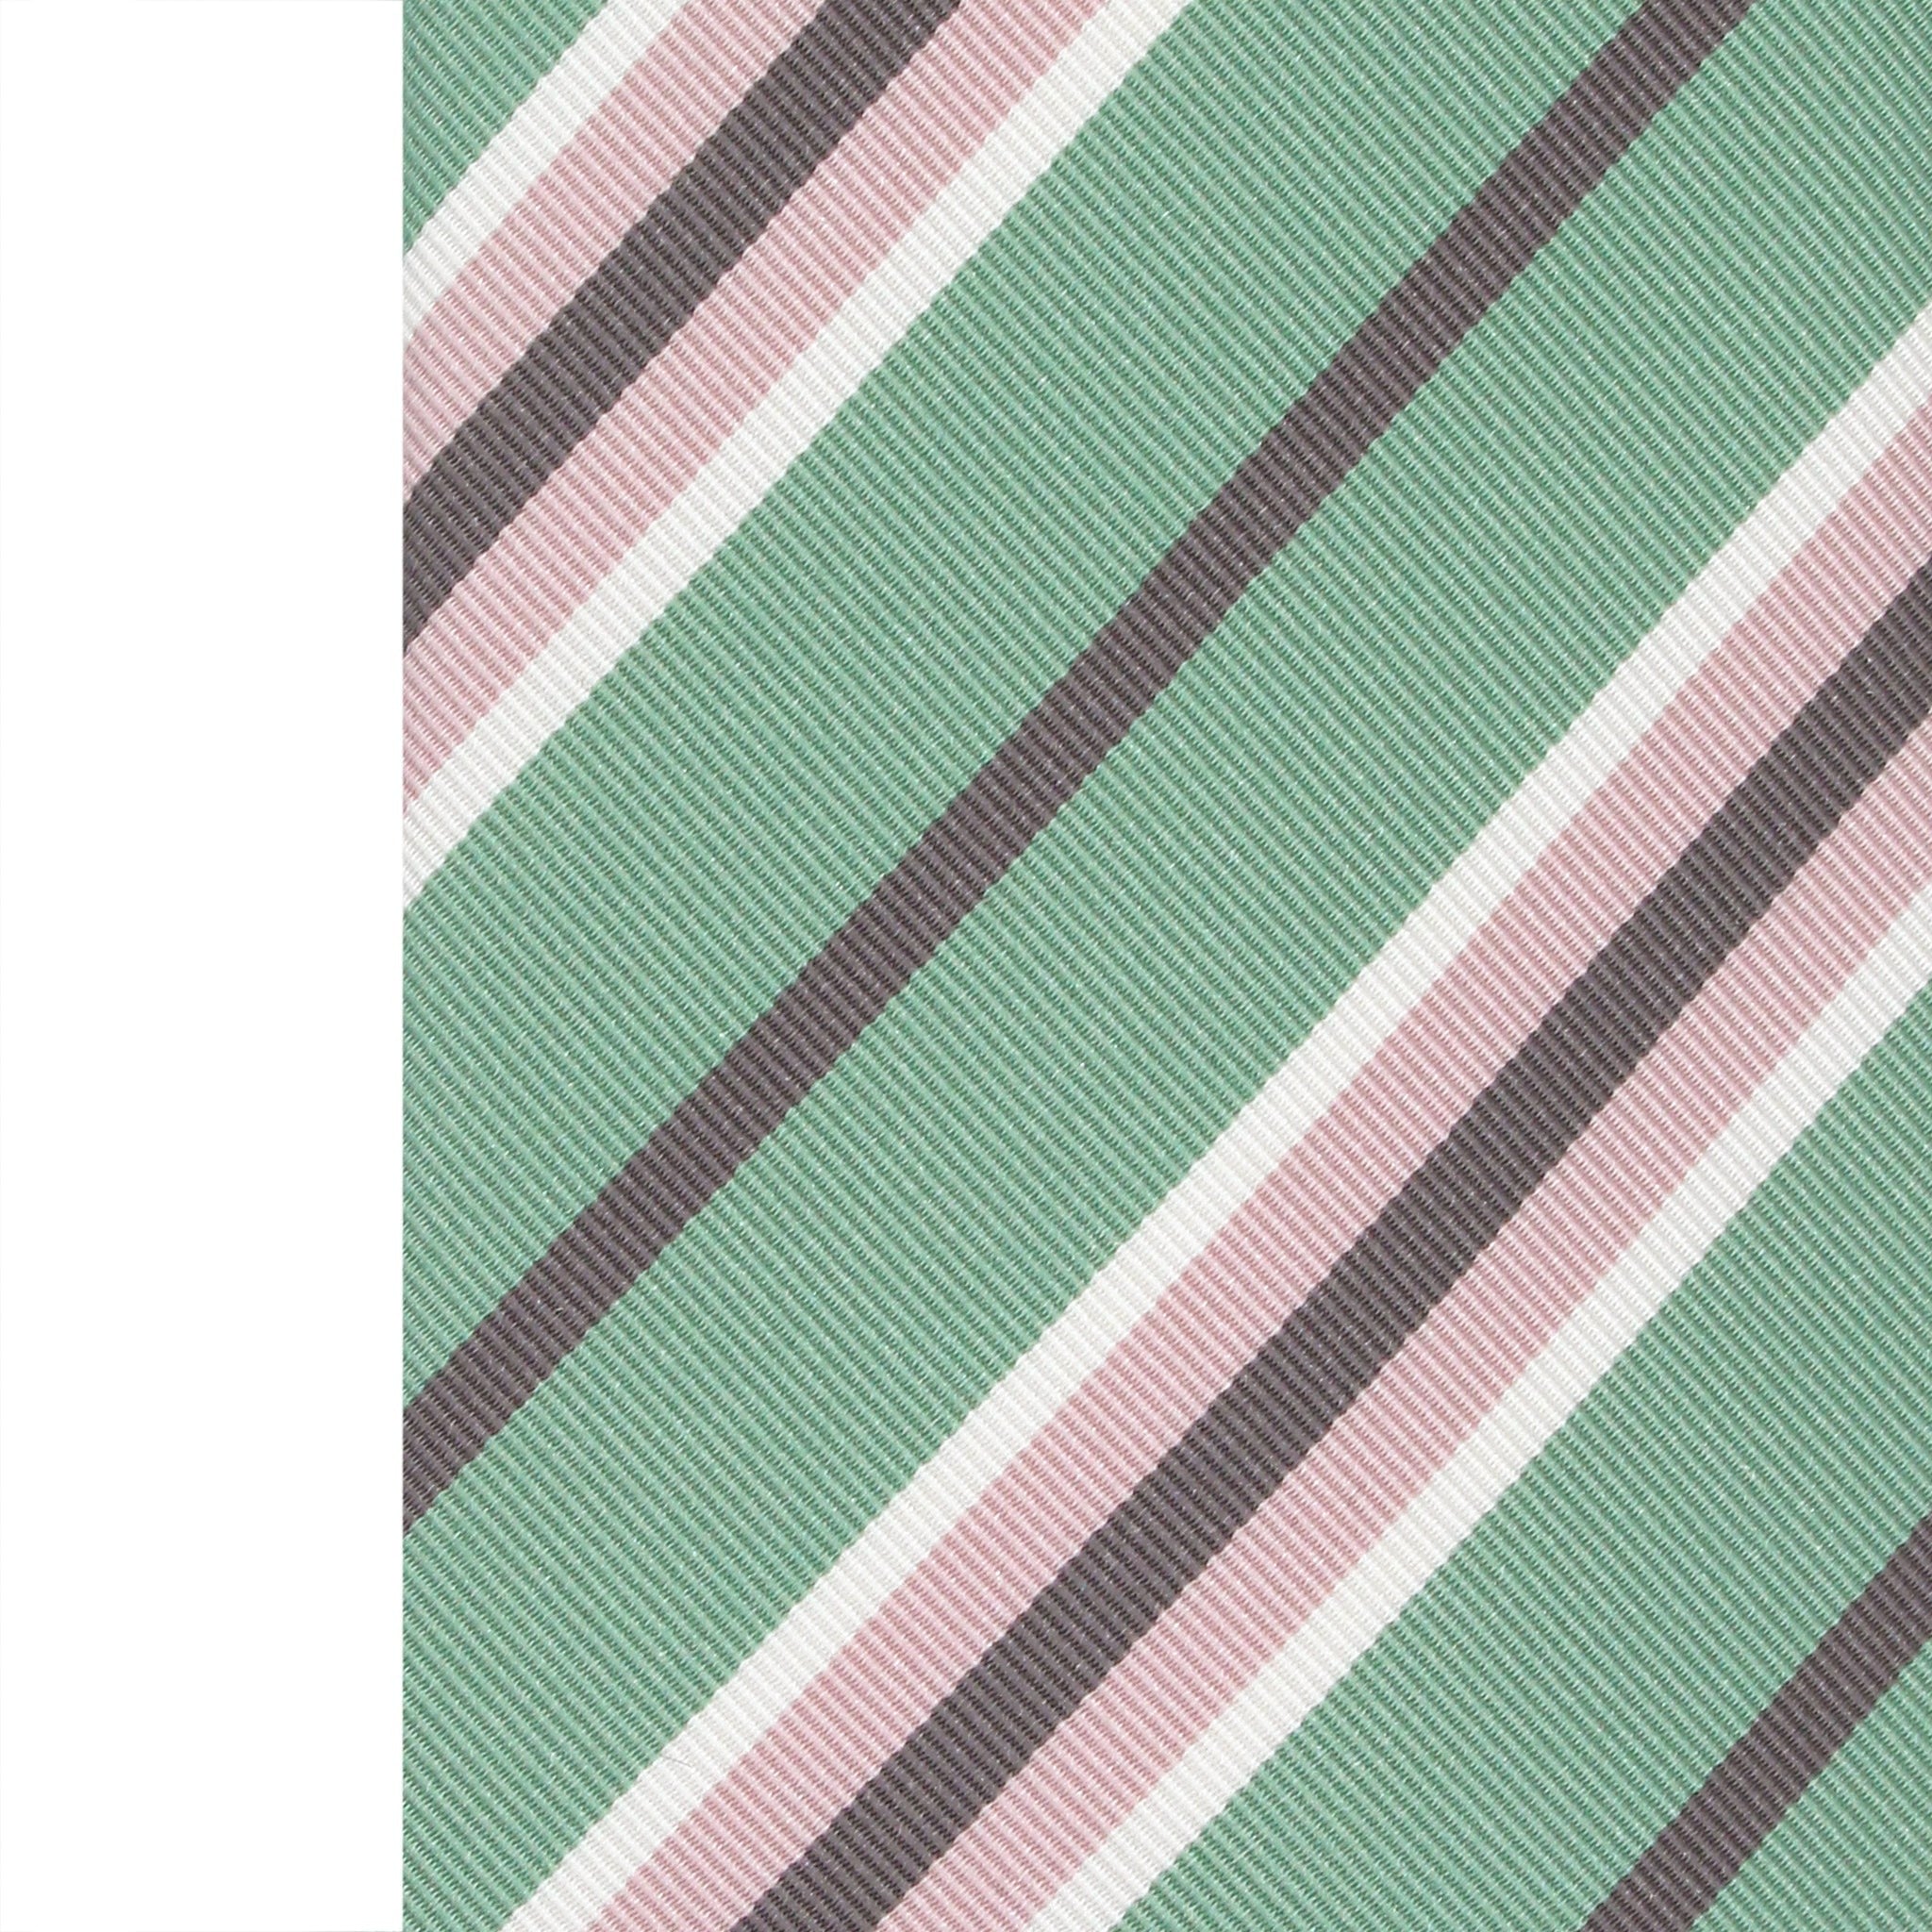 Anversa silk cotton tie green background pink, brown and white bands